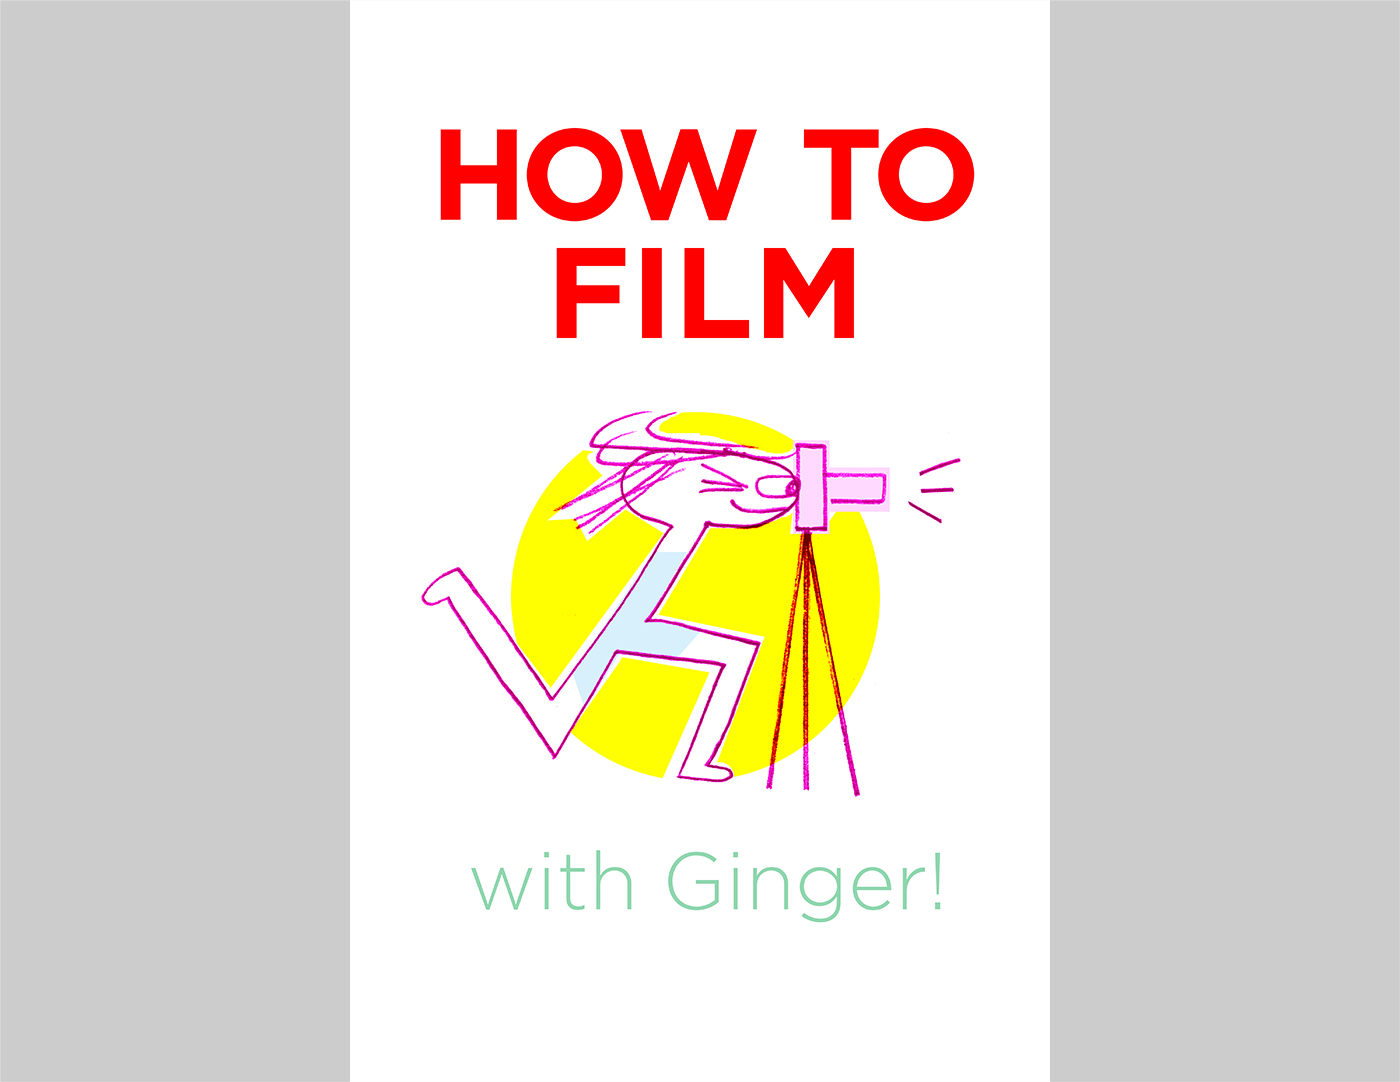 HOW TO FILM with Ginger book spread